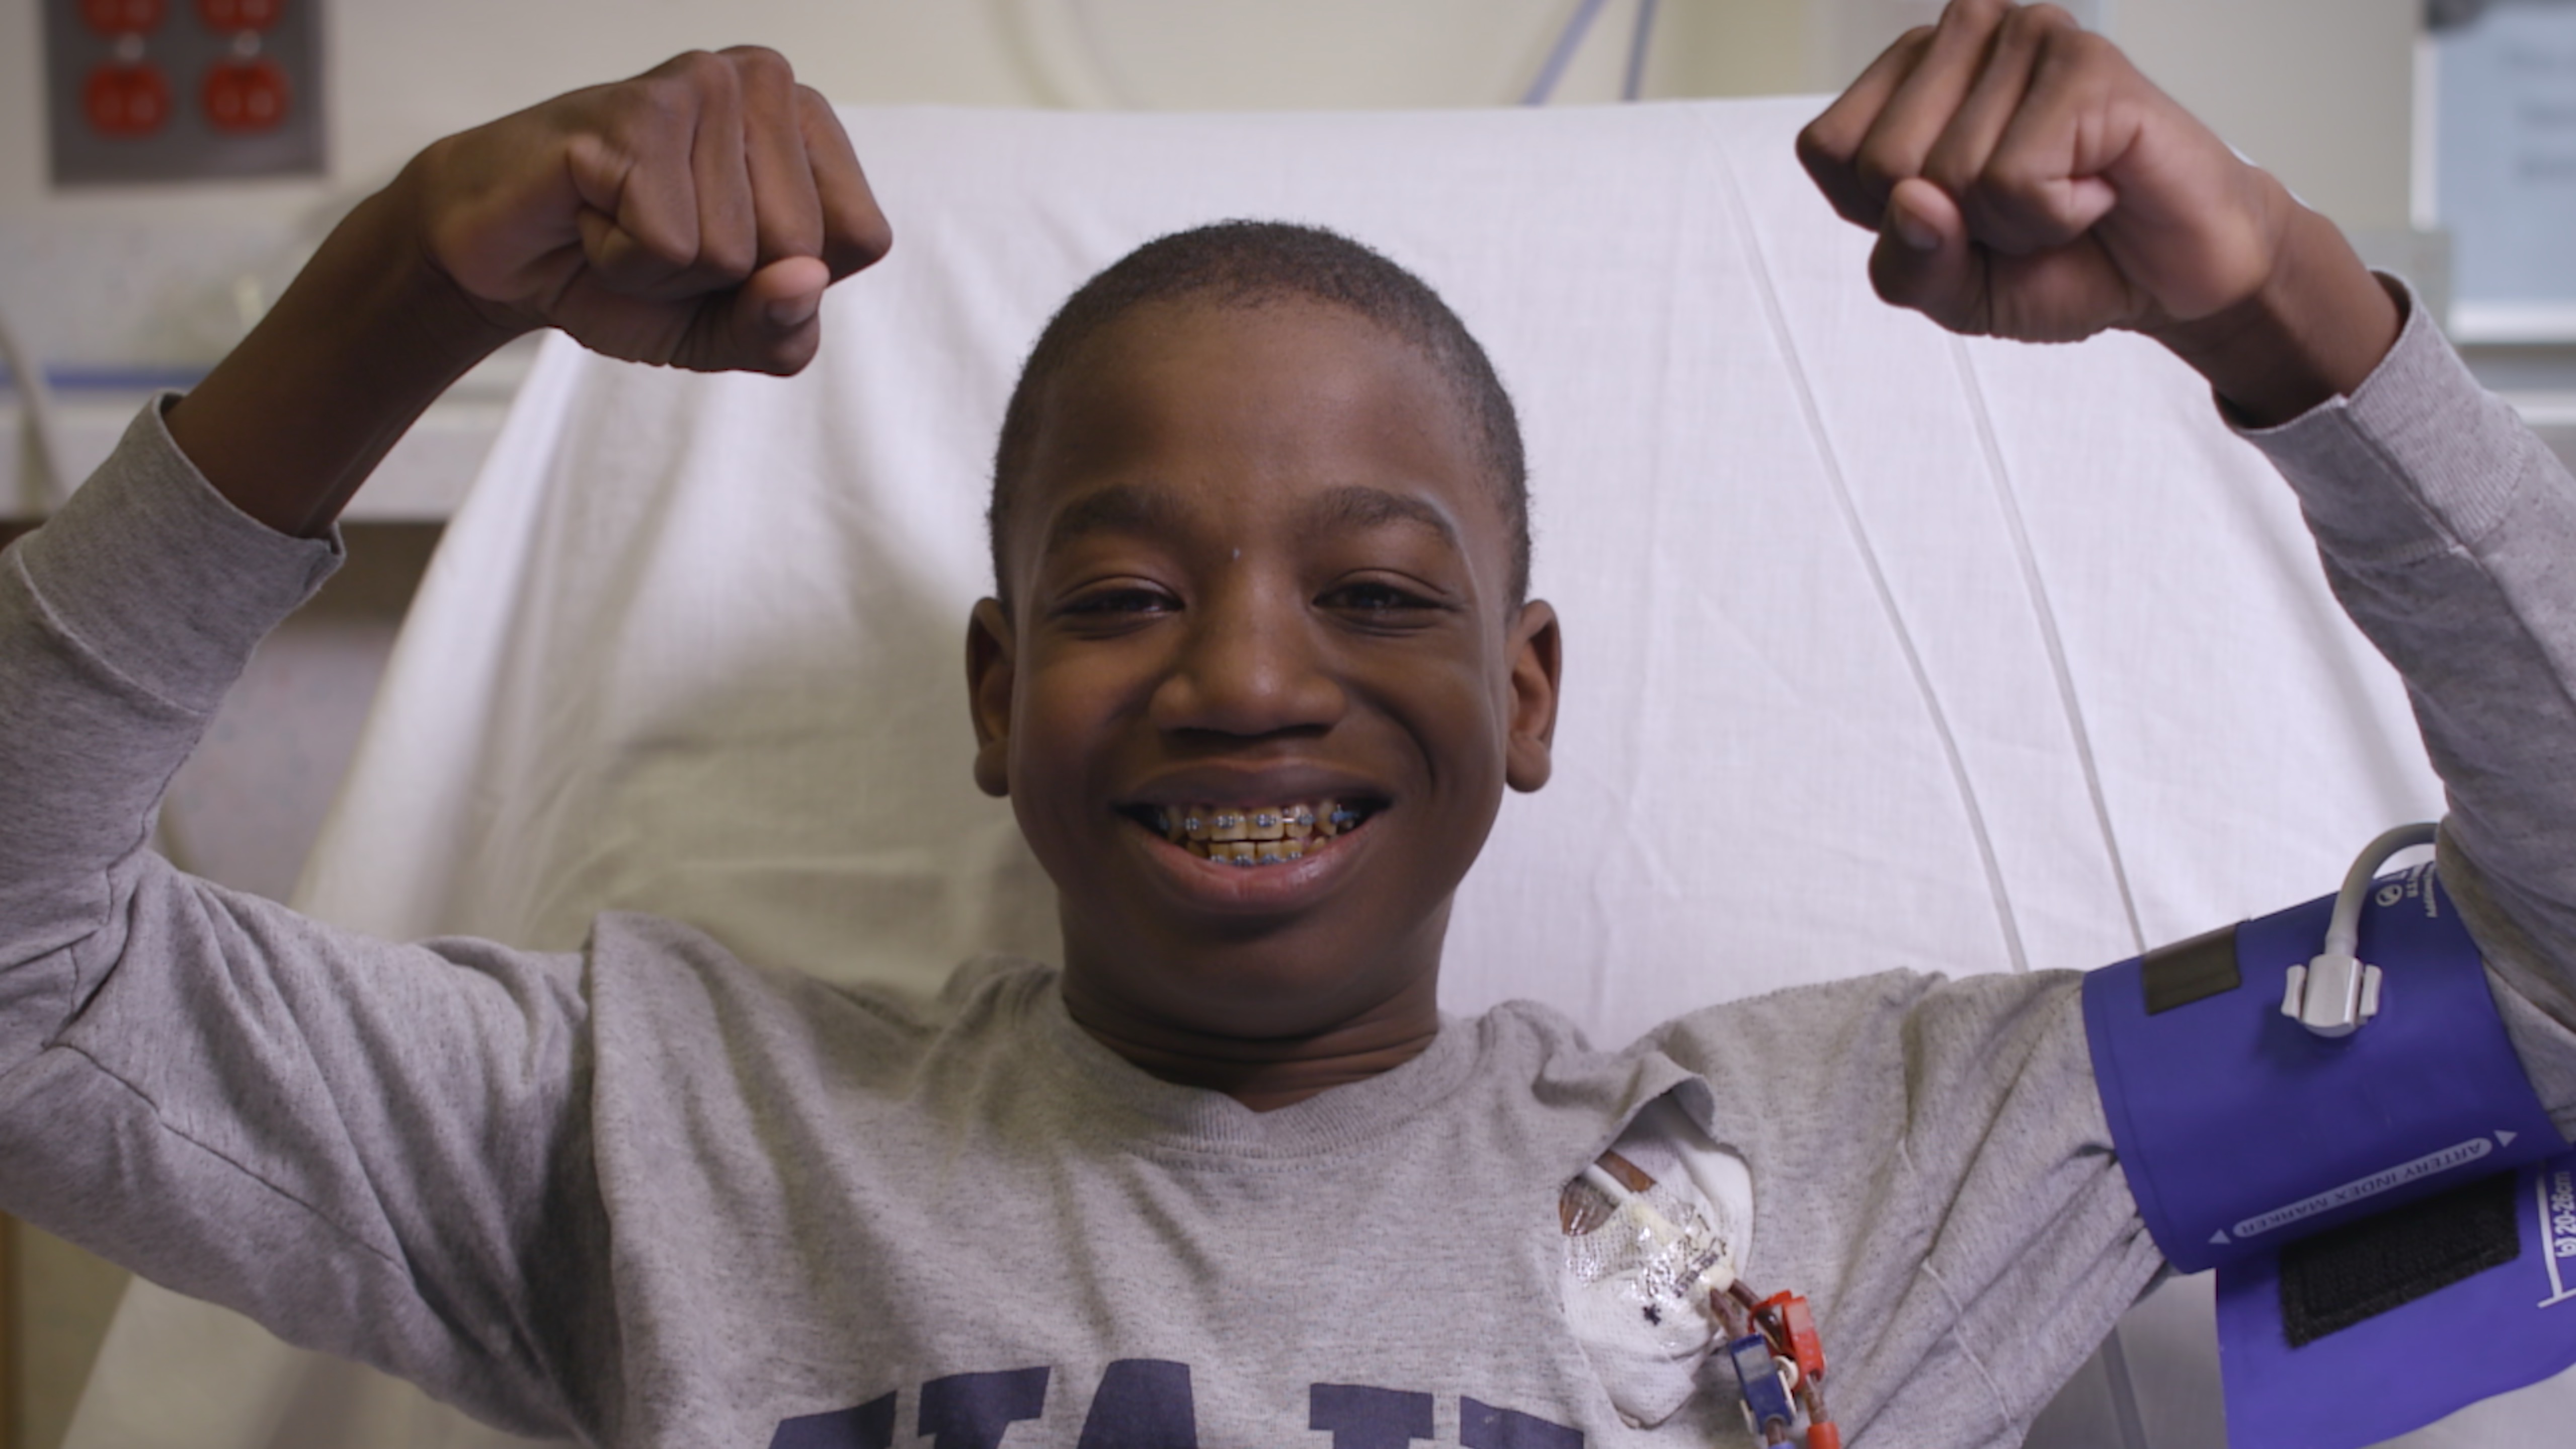 Boy in hospital bed smiling and holding up his arms in a strong muscles pose